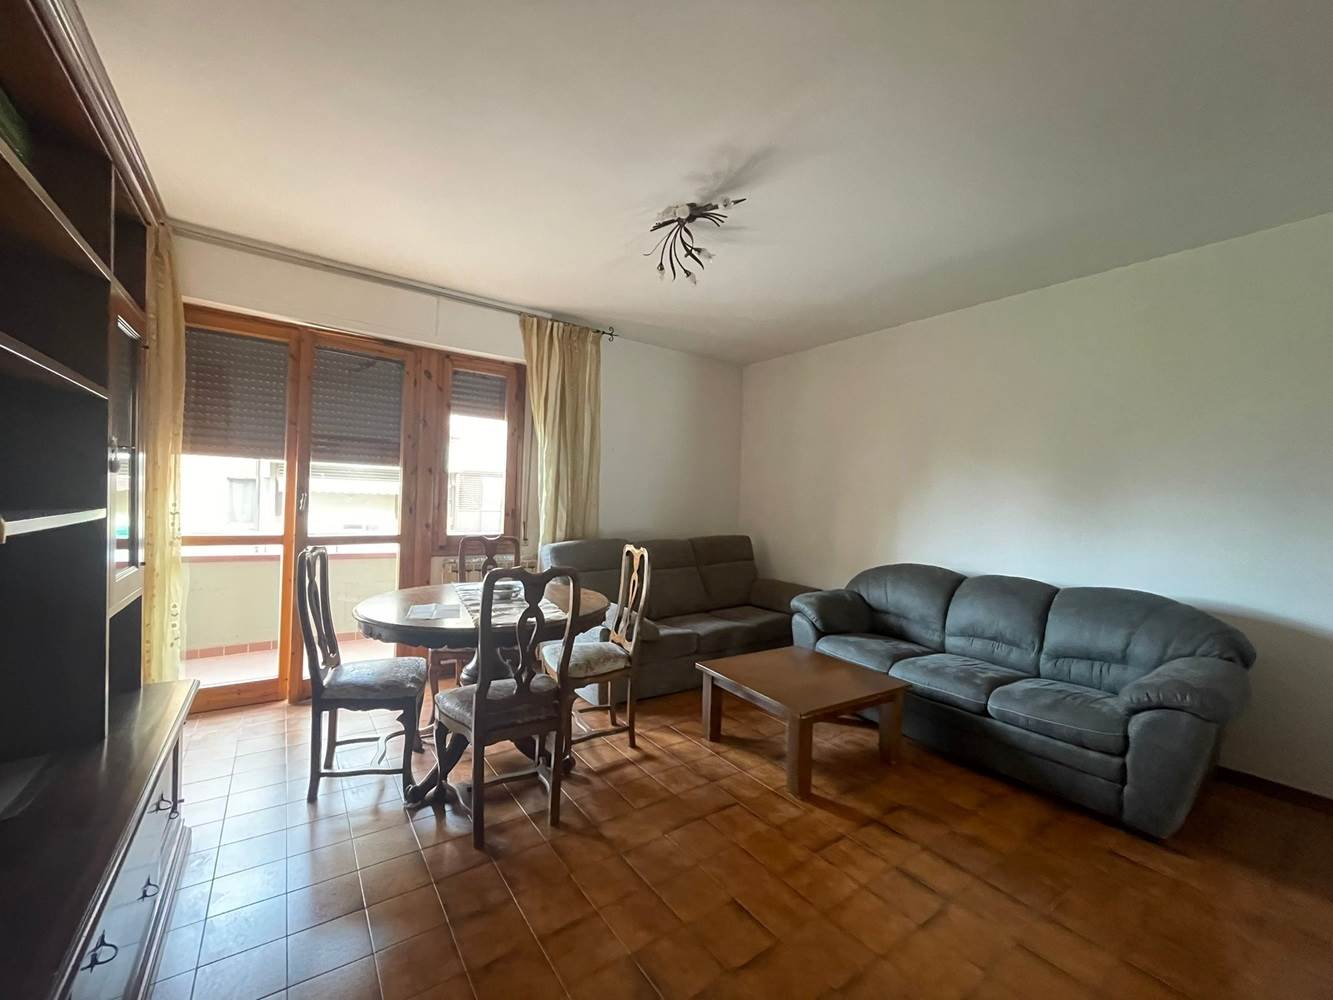 SAN BIAGIO, FIGLINE E INCISA VALDARNO, Apartment for sale of 105 Sq. mt., Good condition, Heating Individual heating system, Energetic class: G, 